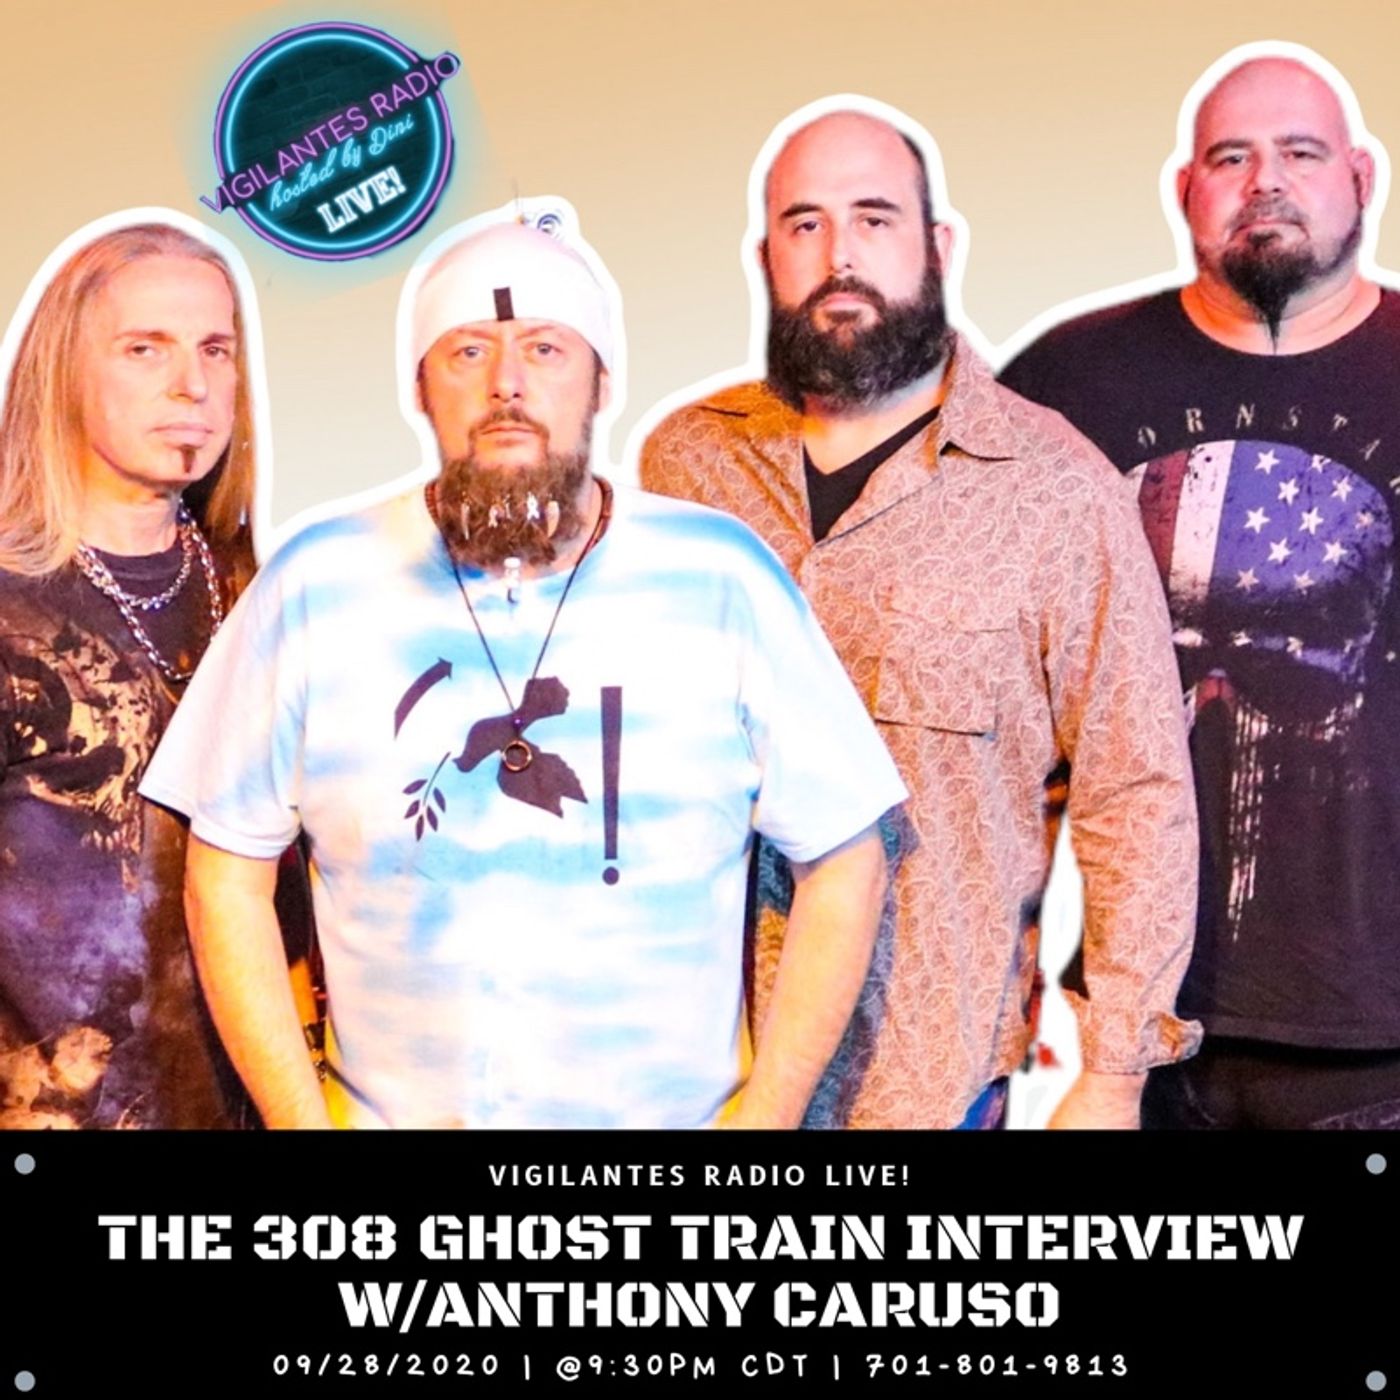 The 308 Ghost Train Interview w/Anthony Caruso. Image